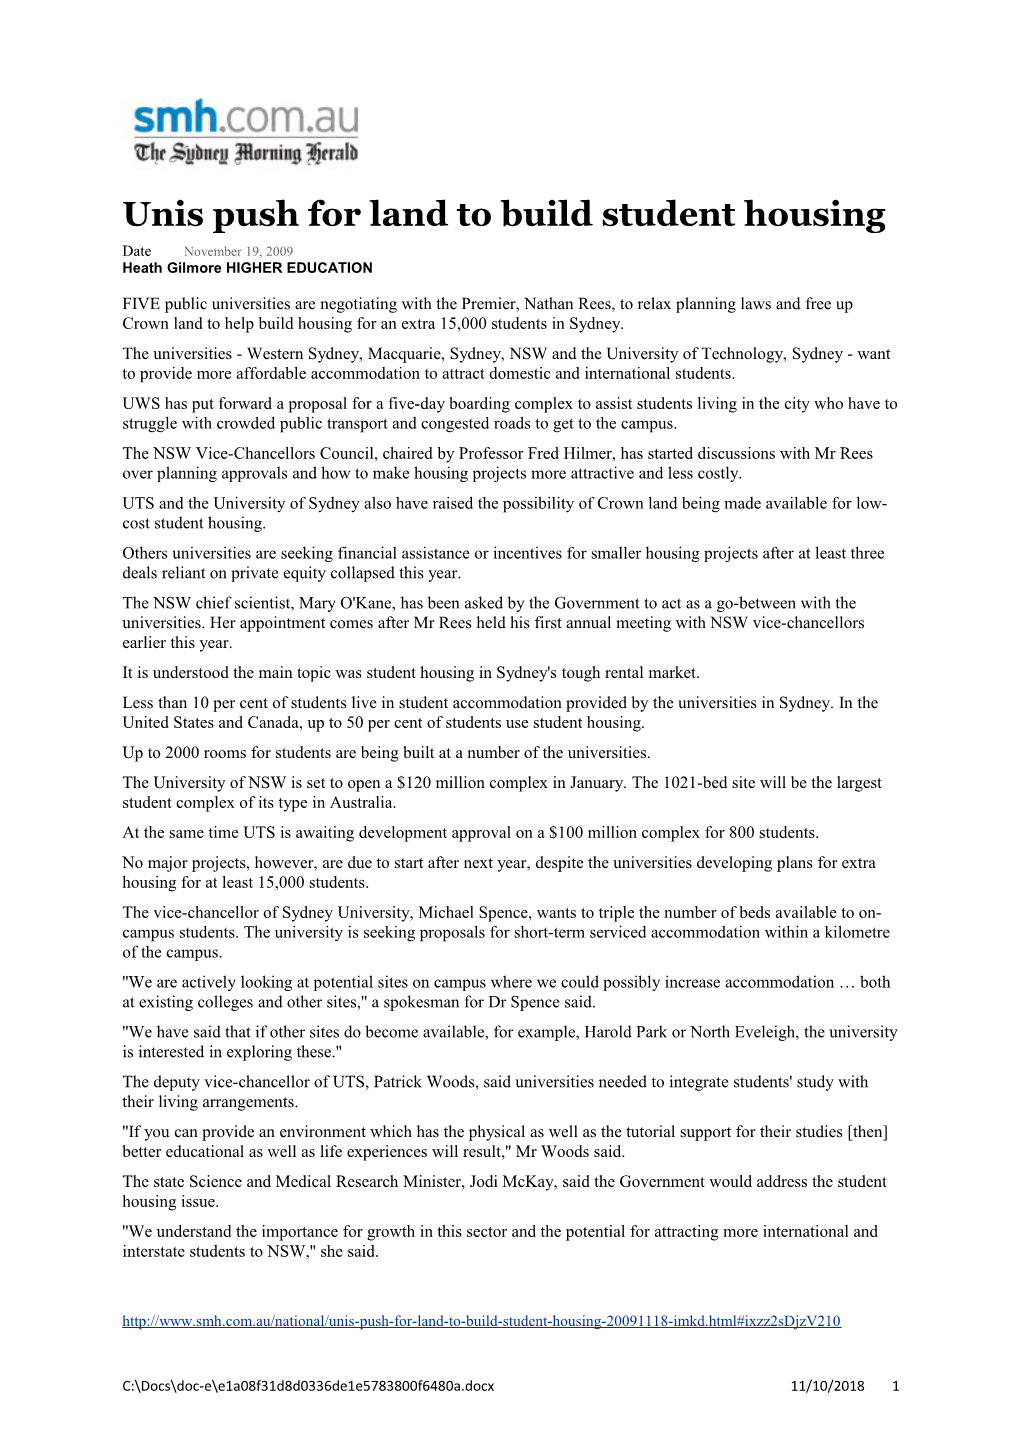 Unis Push for Land to Build Student Housing